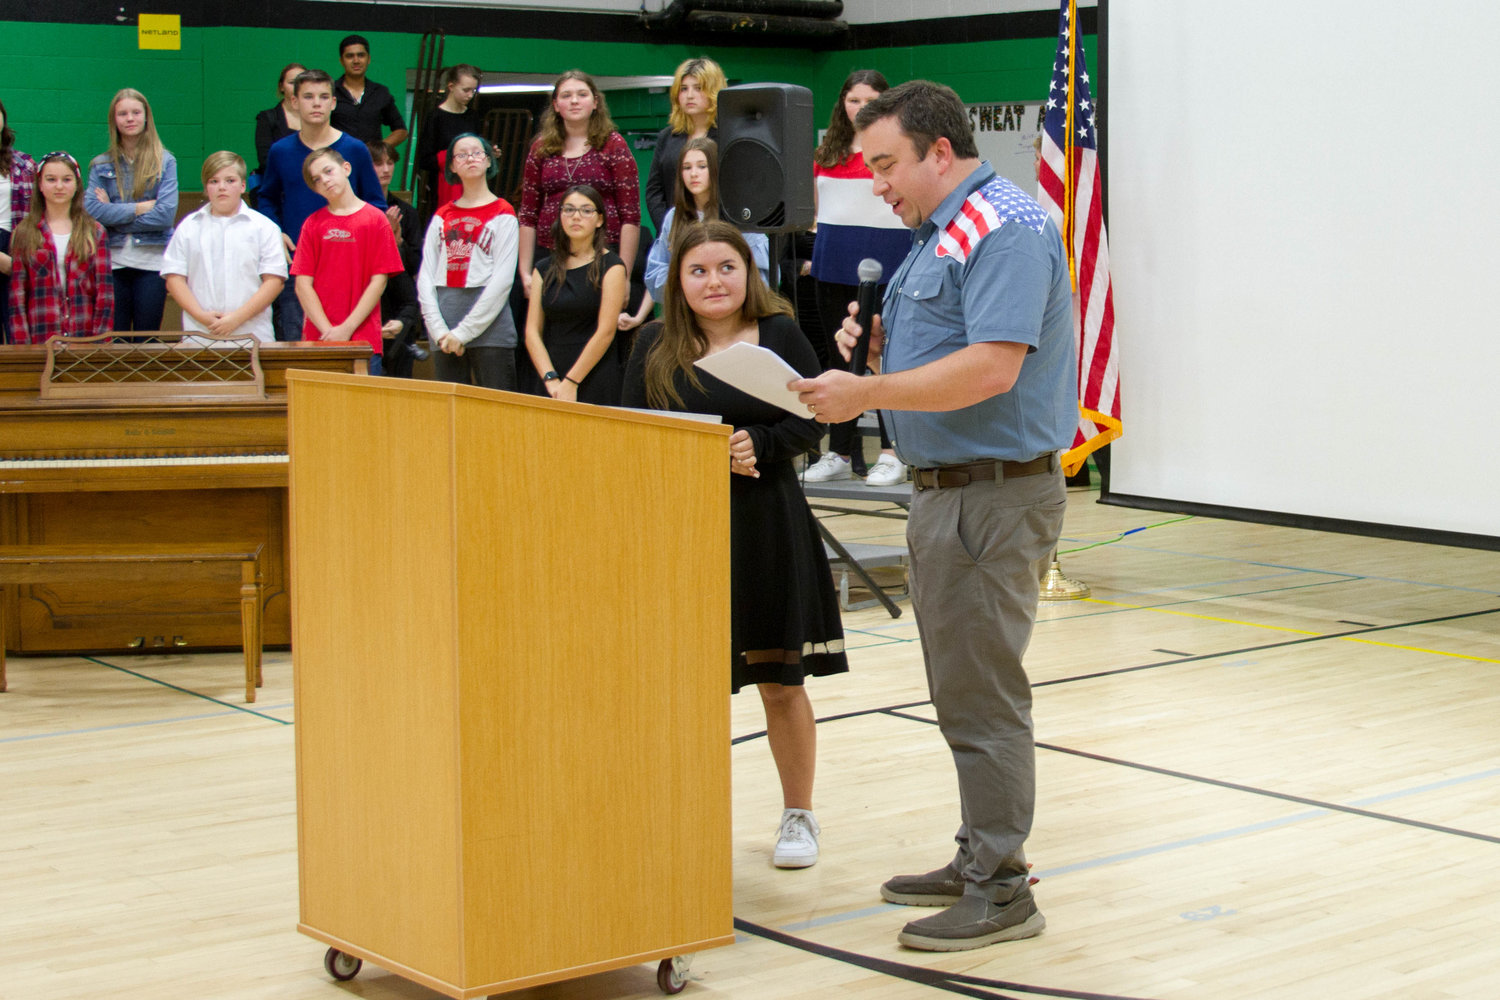 Abigail Alway initially thought Principal Russell Evans was recognizing her for a solo she performed during a Veterans Day assembly but she was later surprised by her uncle who returned home on temporary leave.